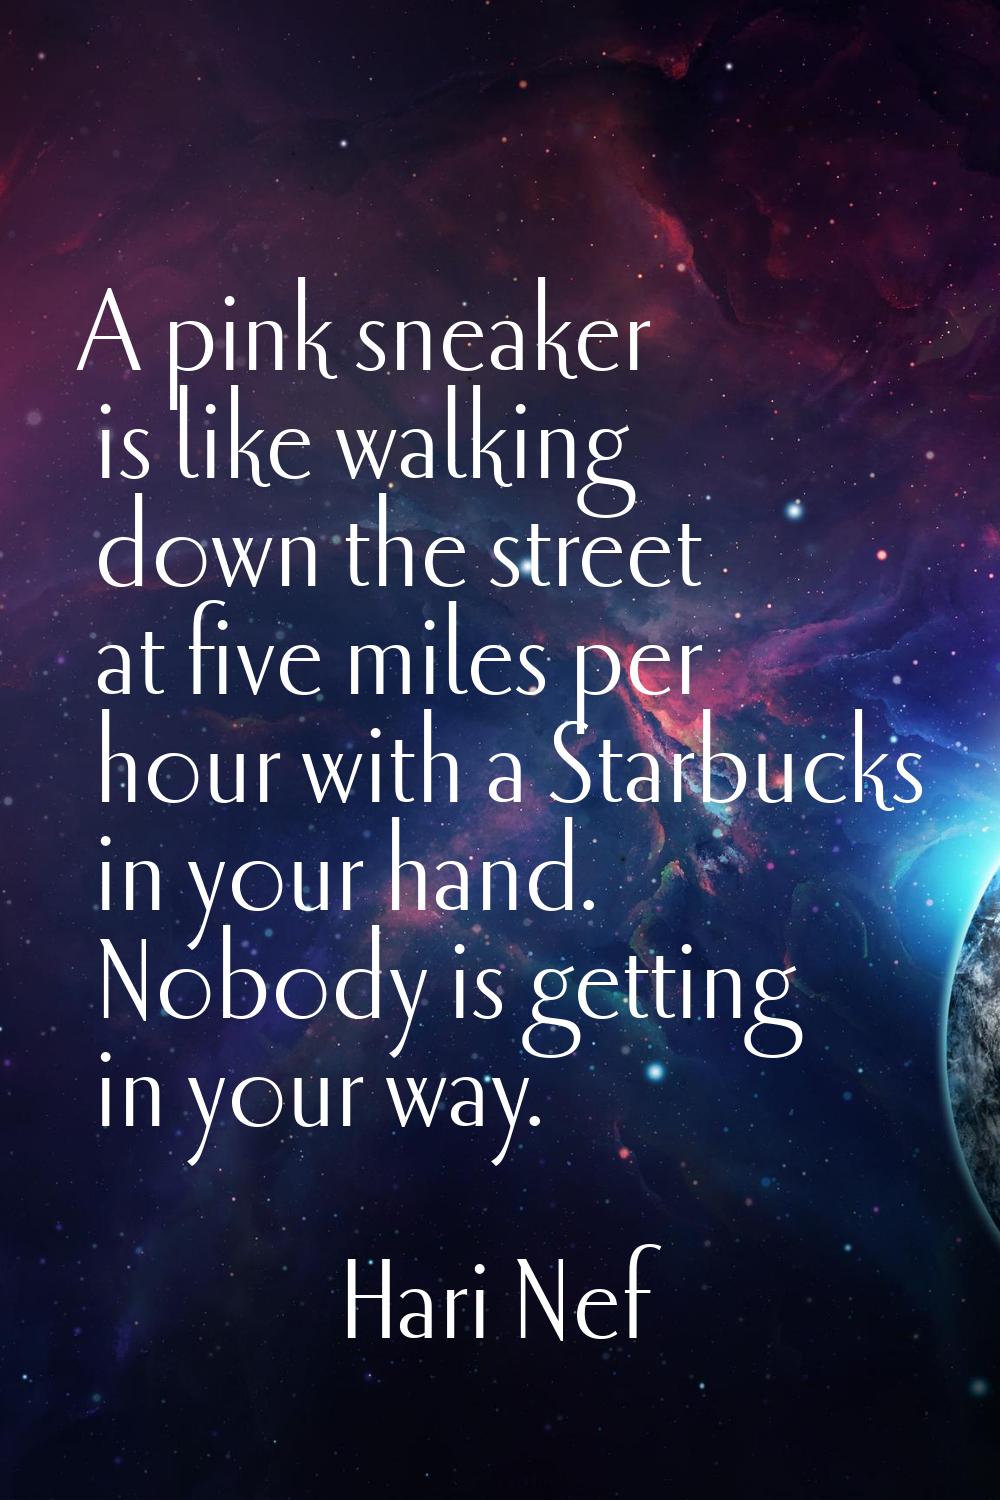 A pink sneaker is like walking down the street at five miles per hour with a Starbucks in your hand